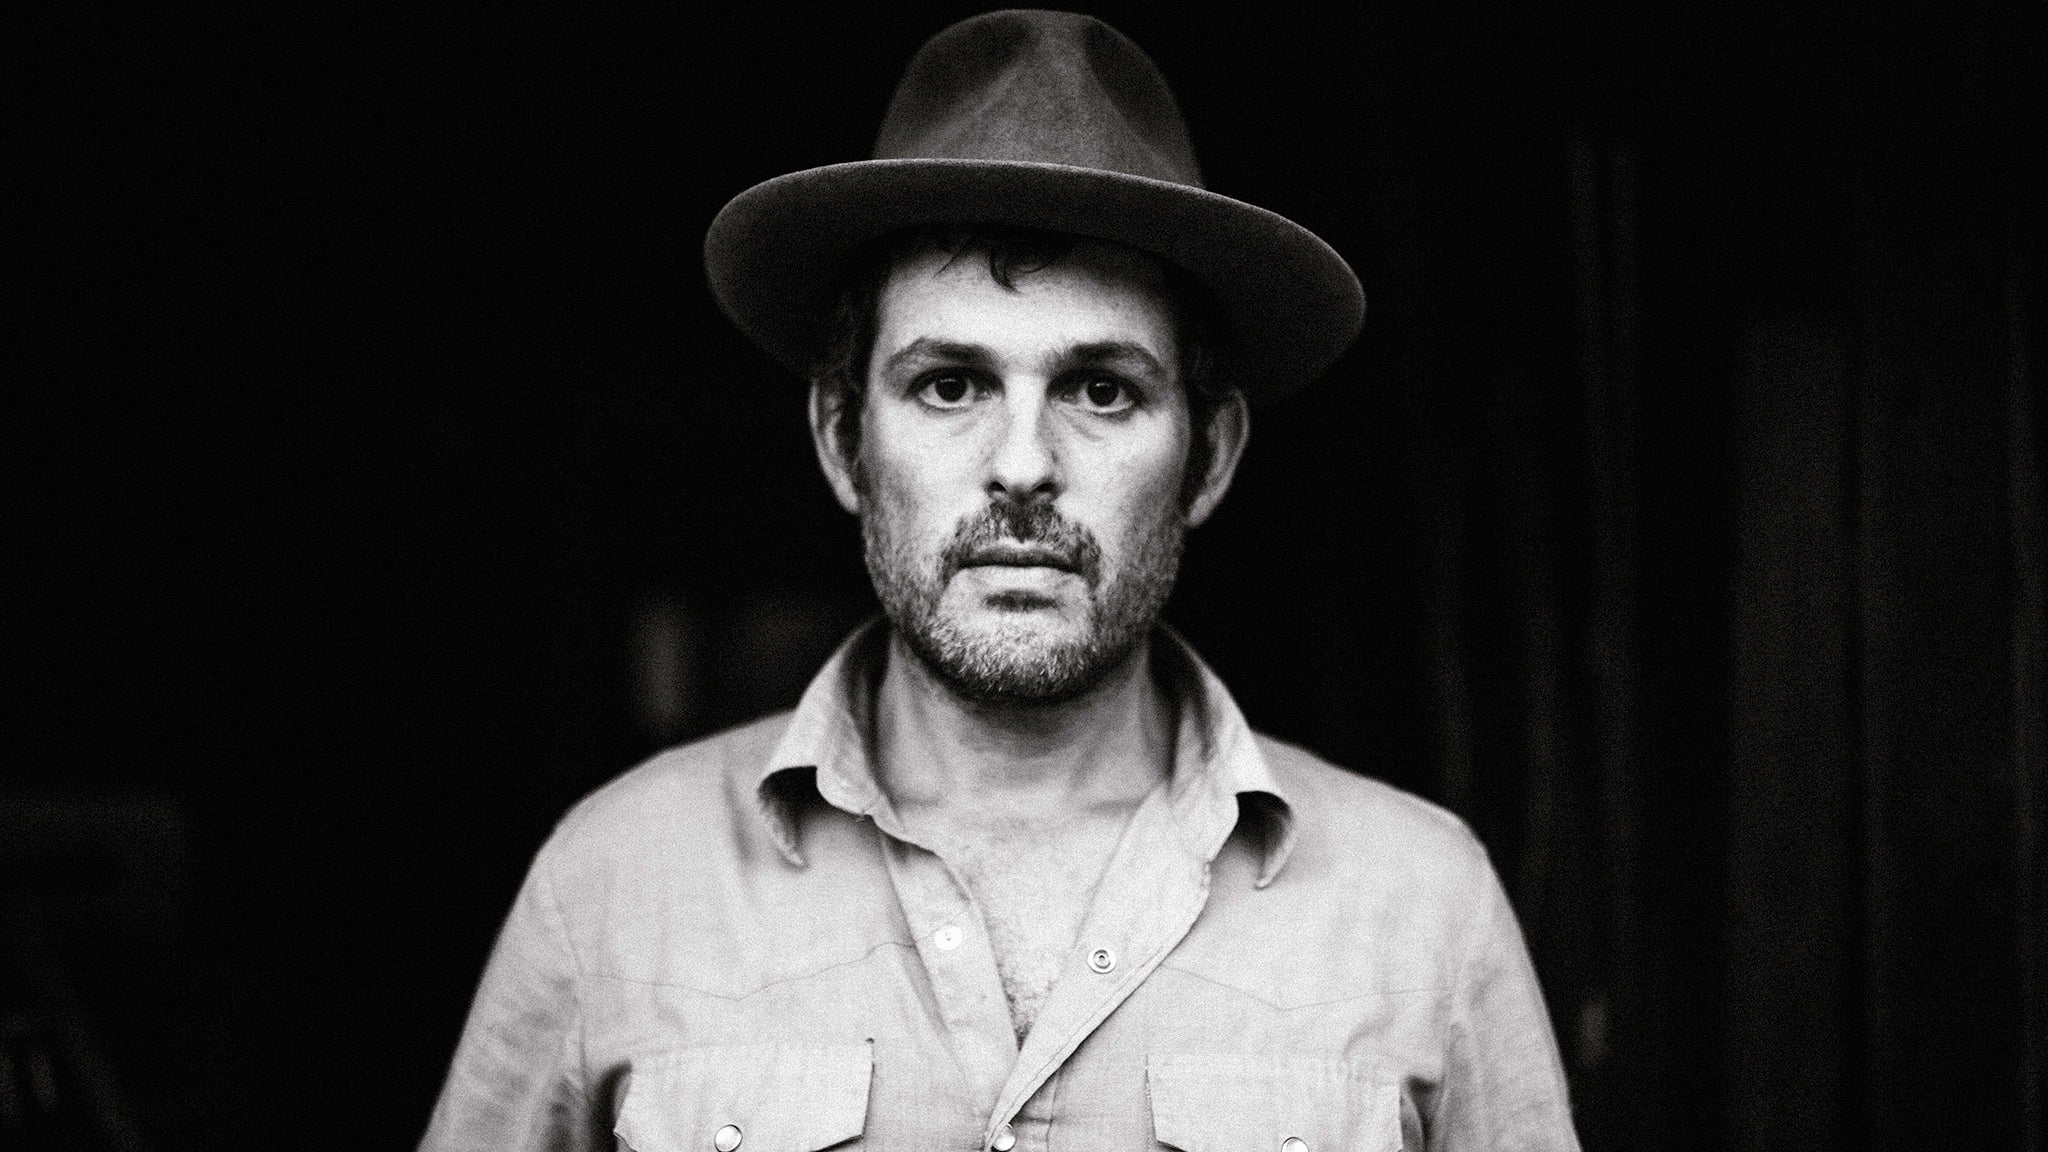 new presale code for Gregory Alan Isakov face value tickets in Kingston at Ulster Performing Arts Center